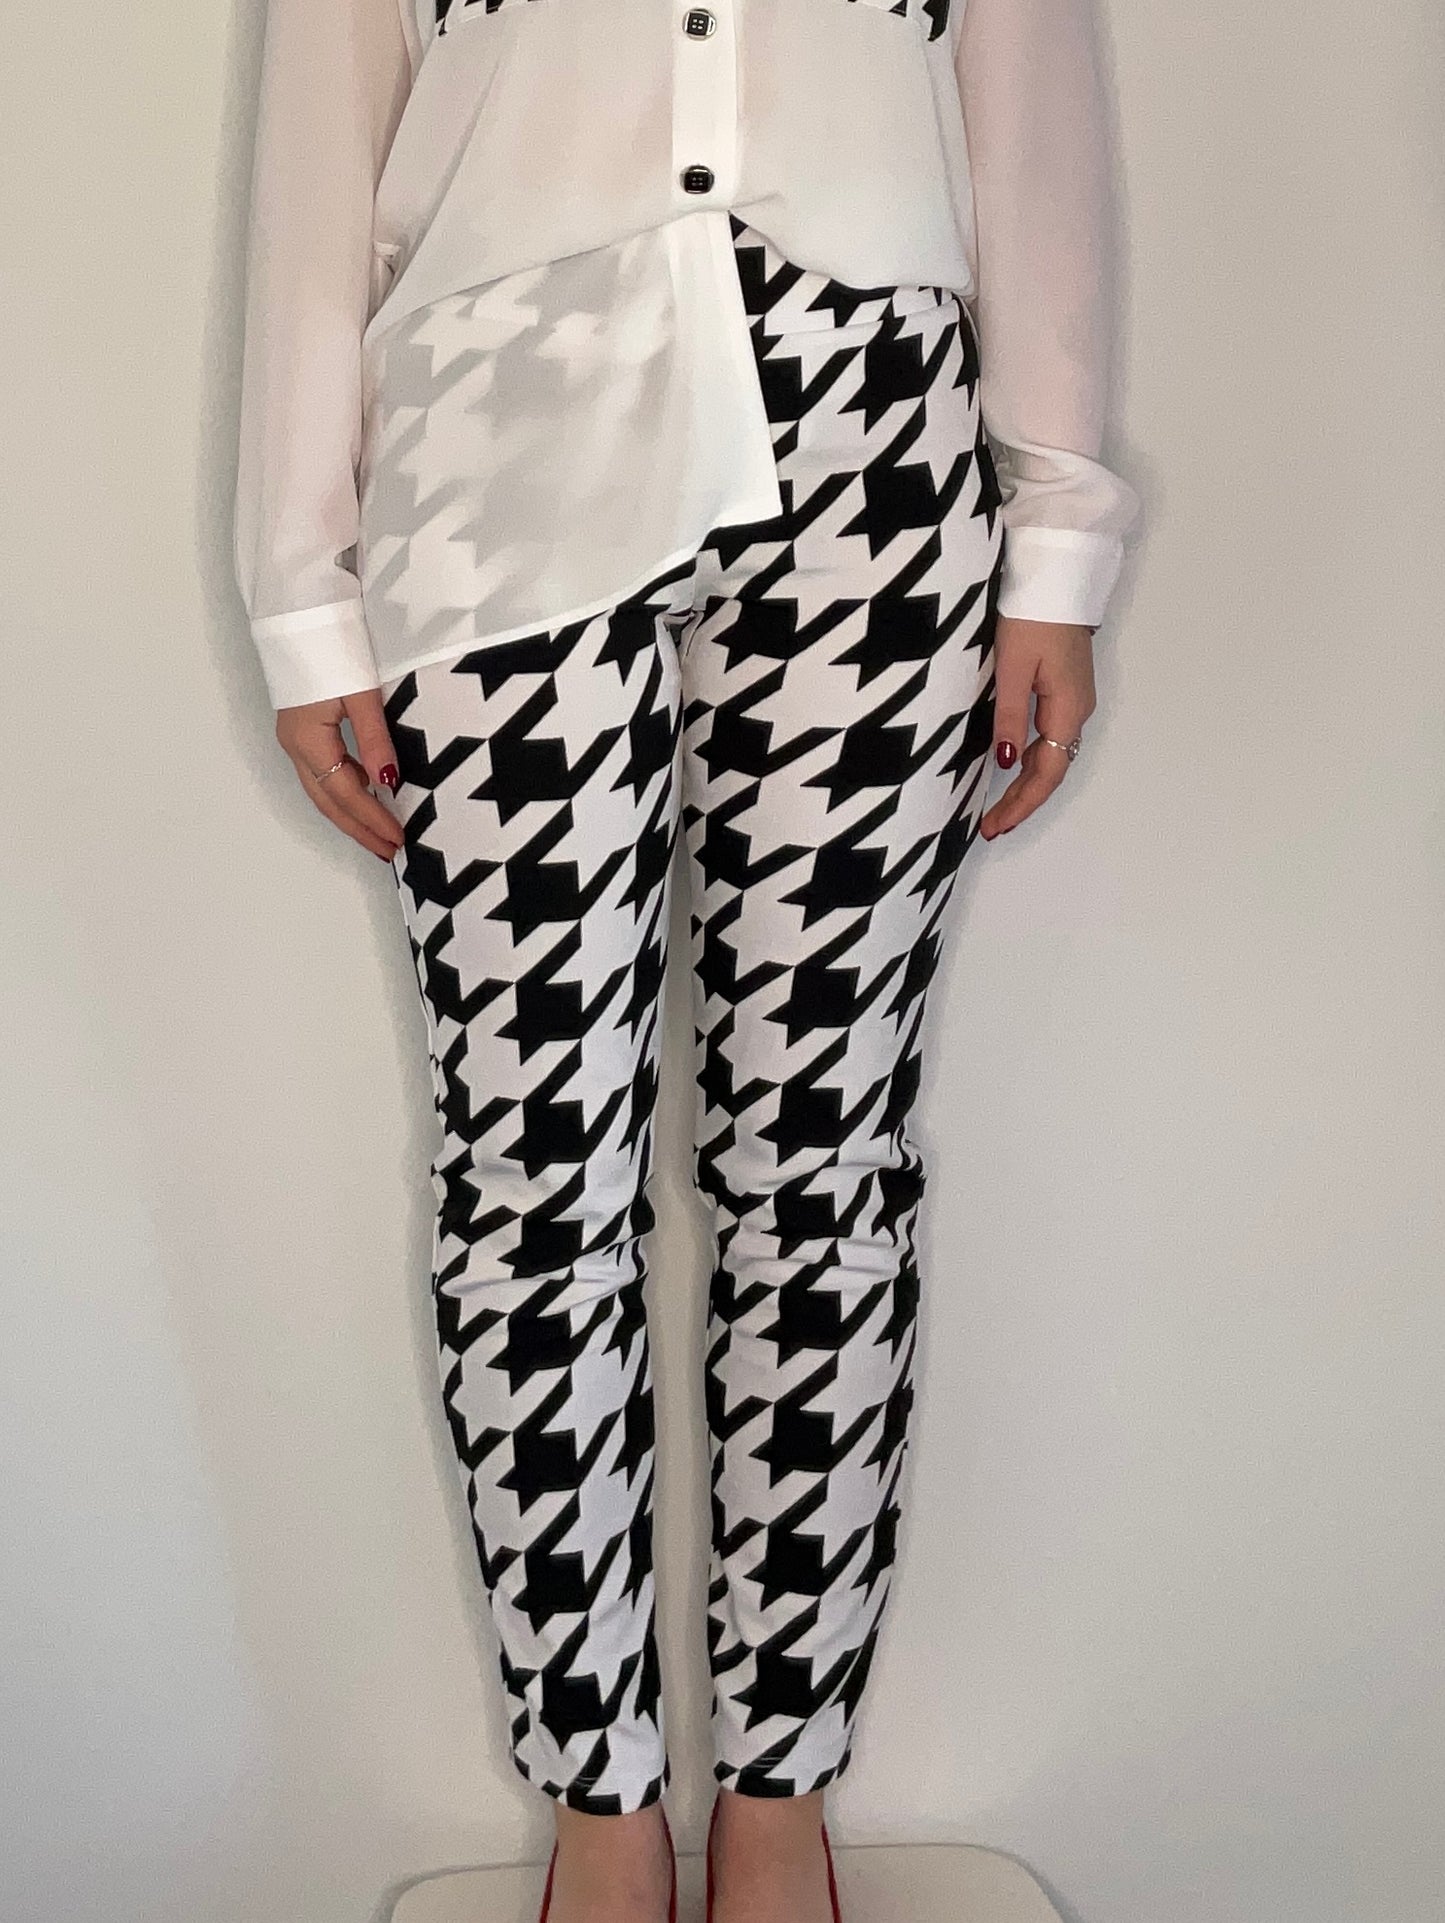 HOUNDSTOOTH PANT